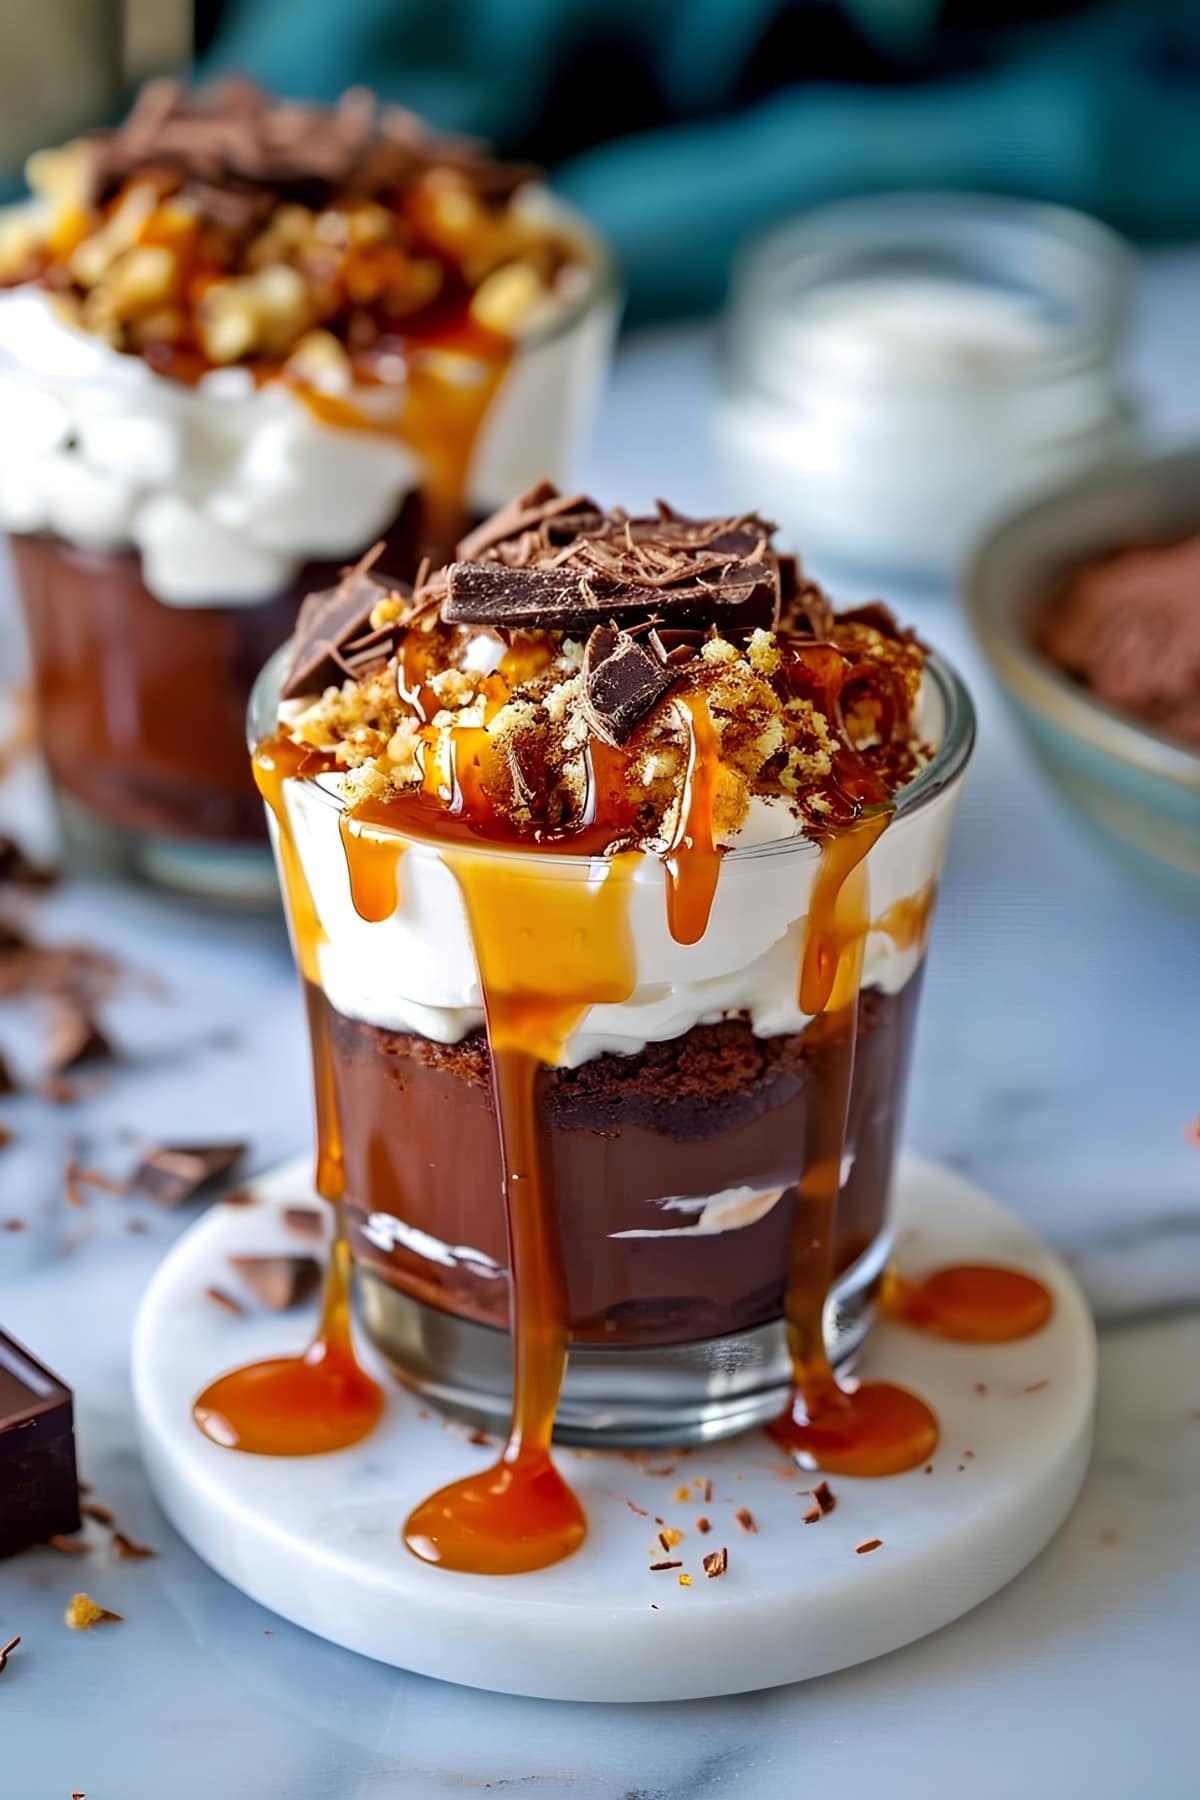 Chocolate layered dessert in a cup topped with caramel syrup